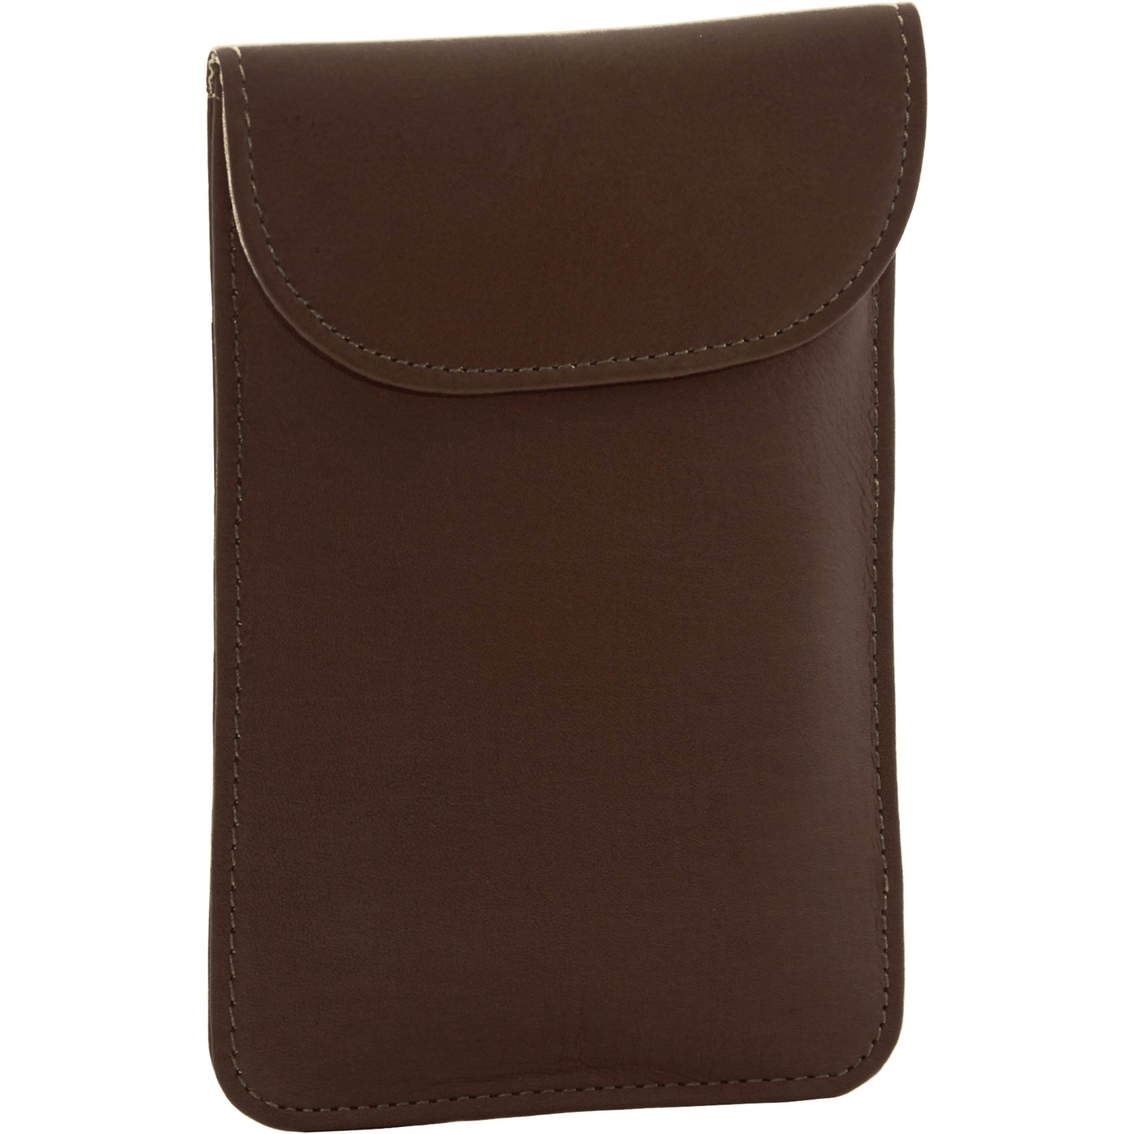 Piel Leather Smartphone Hanging Case | Business Cases | Clothing ...